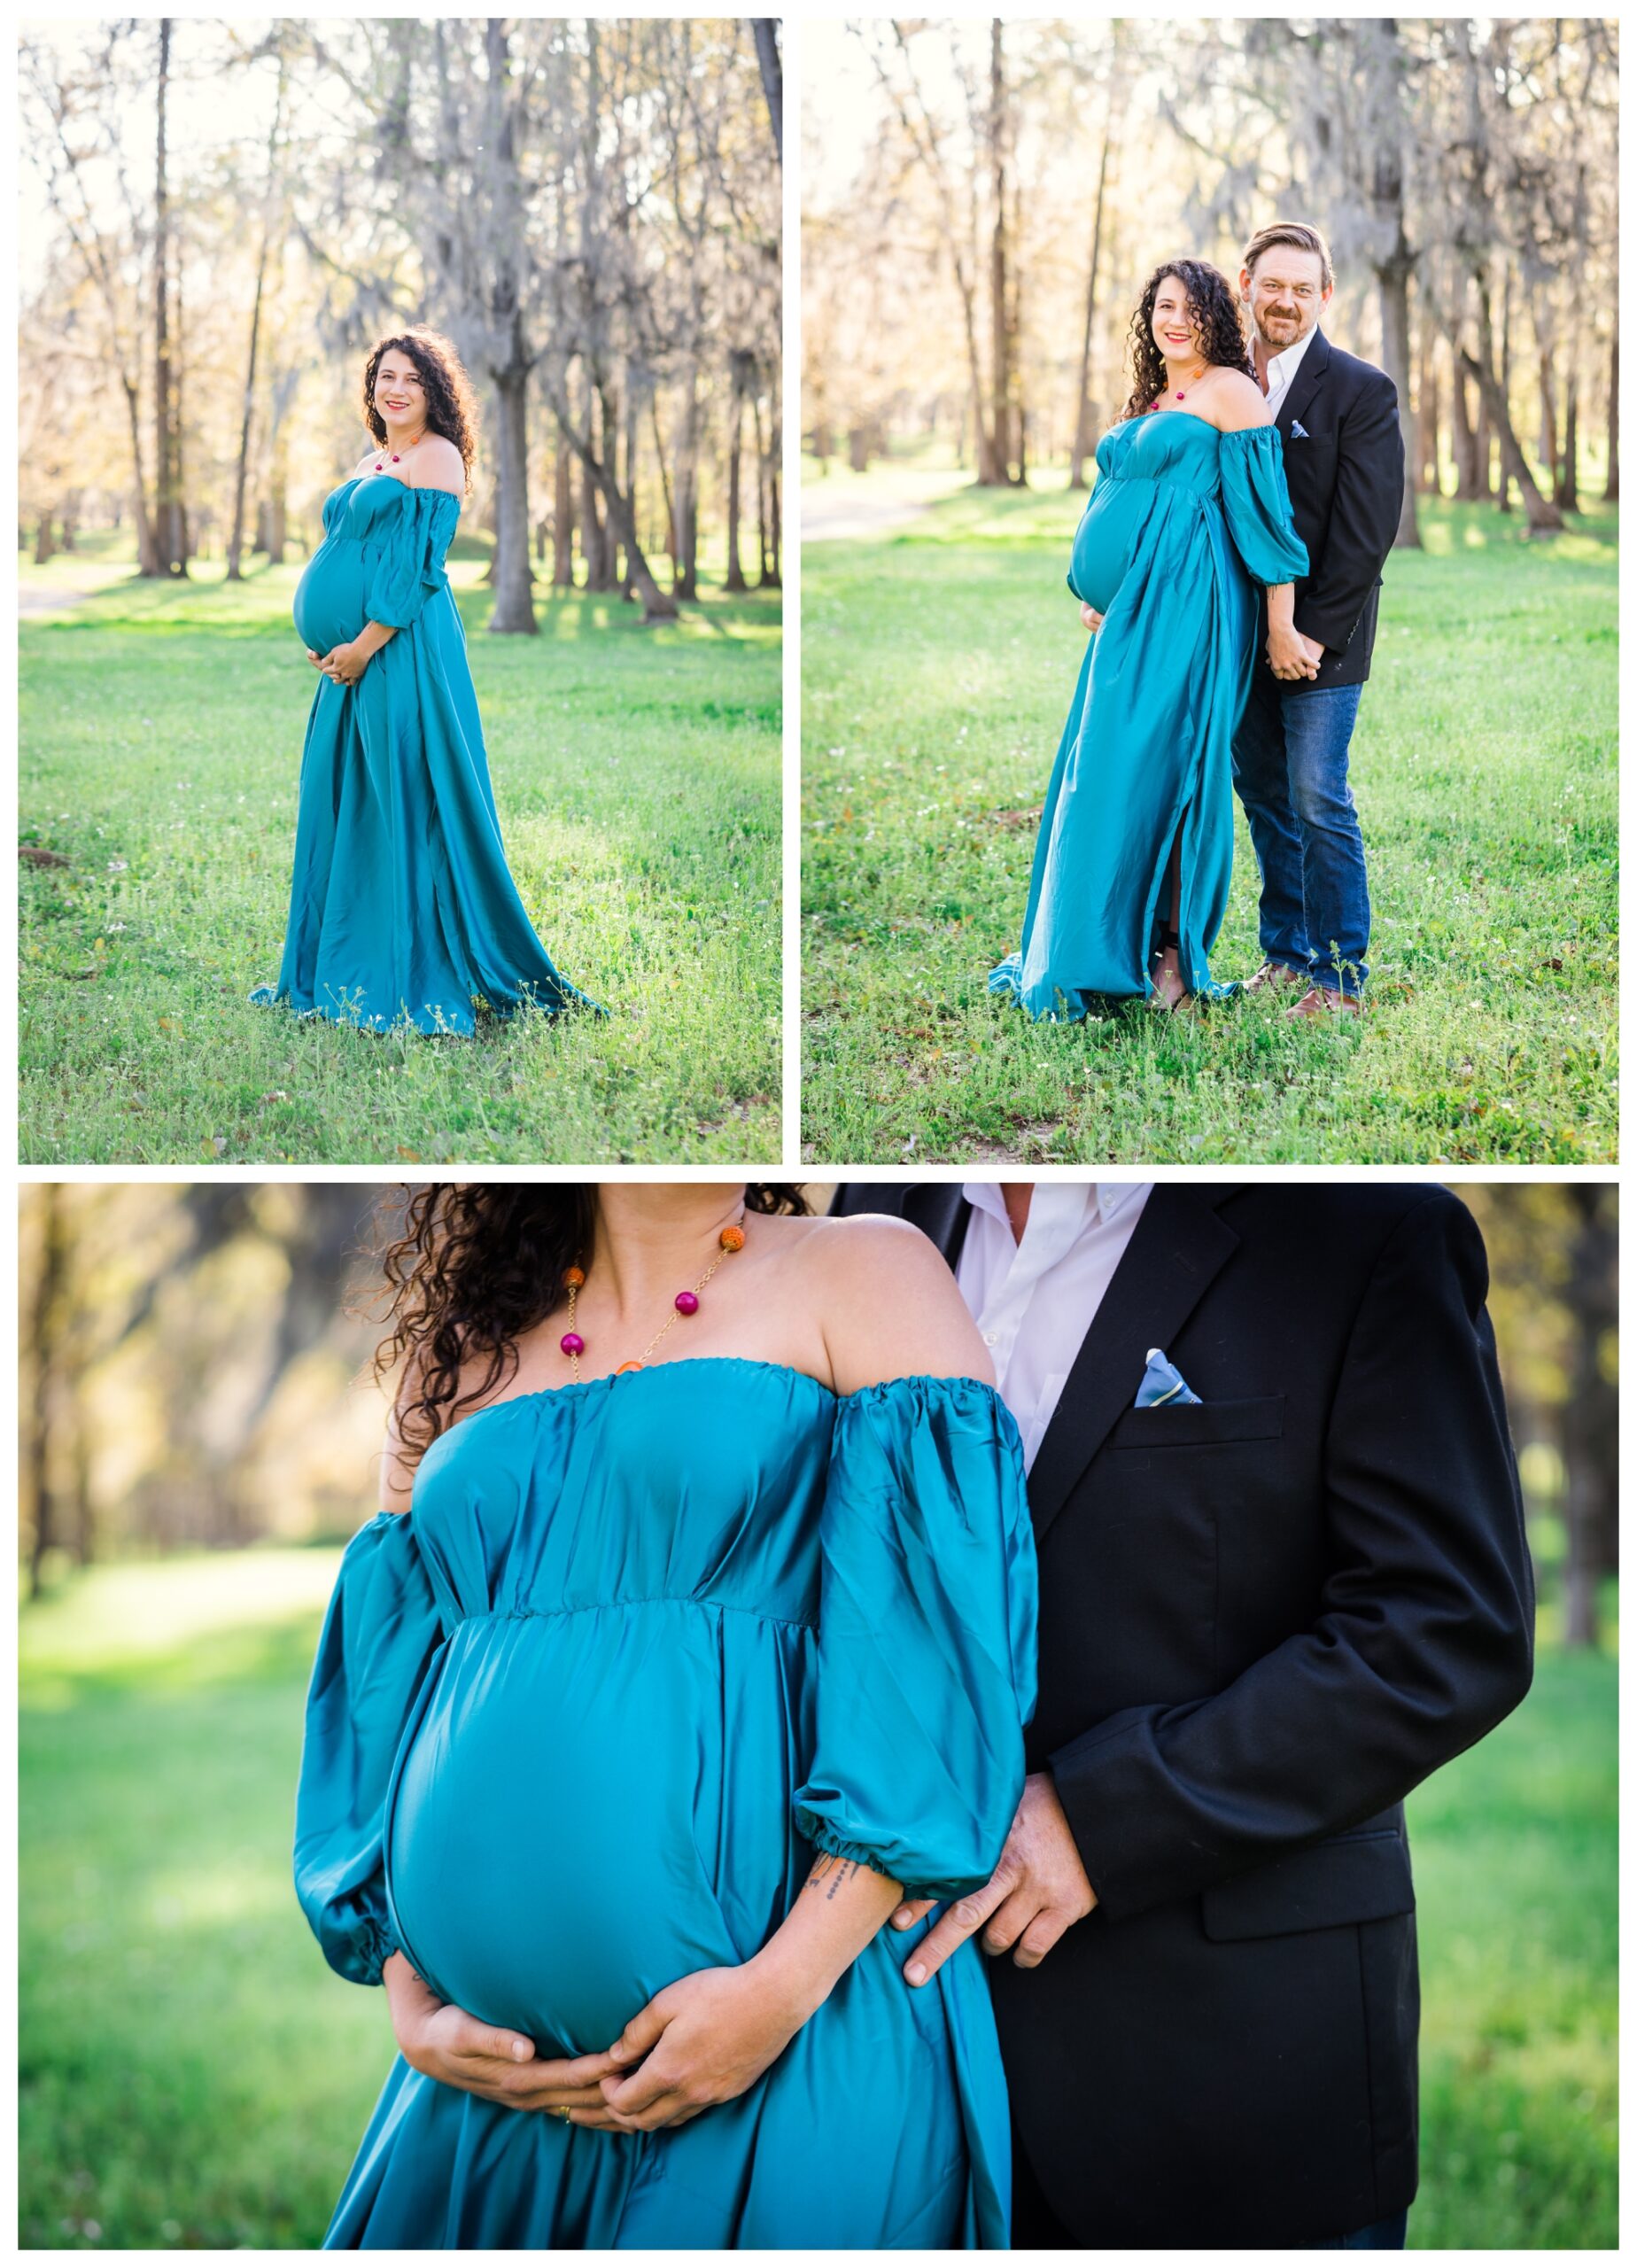 Woman in blue dress for maternity photos | Melissa Sheridan Photography